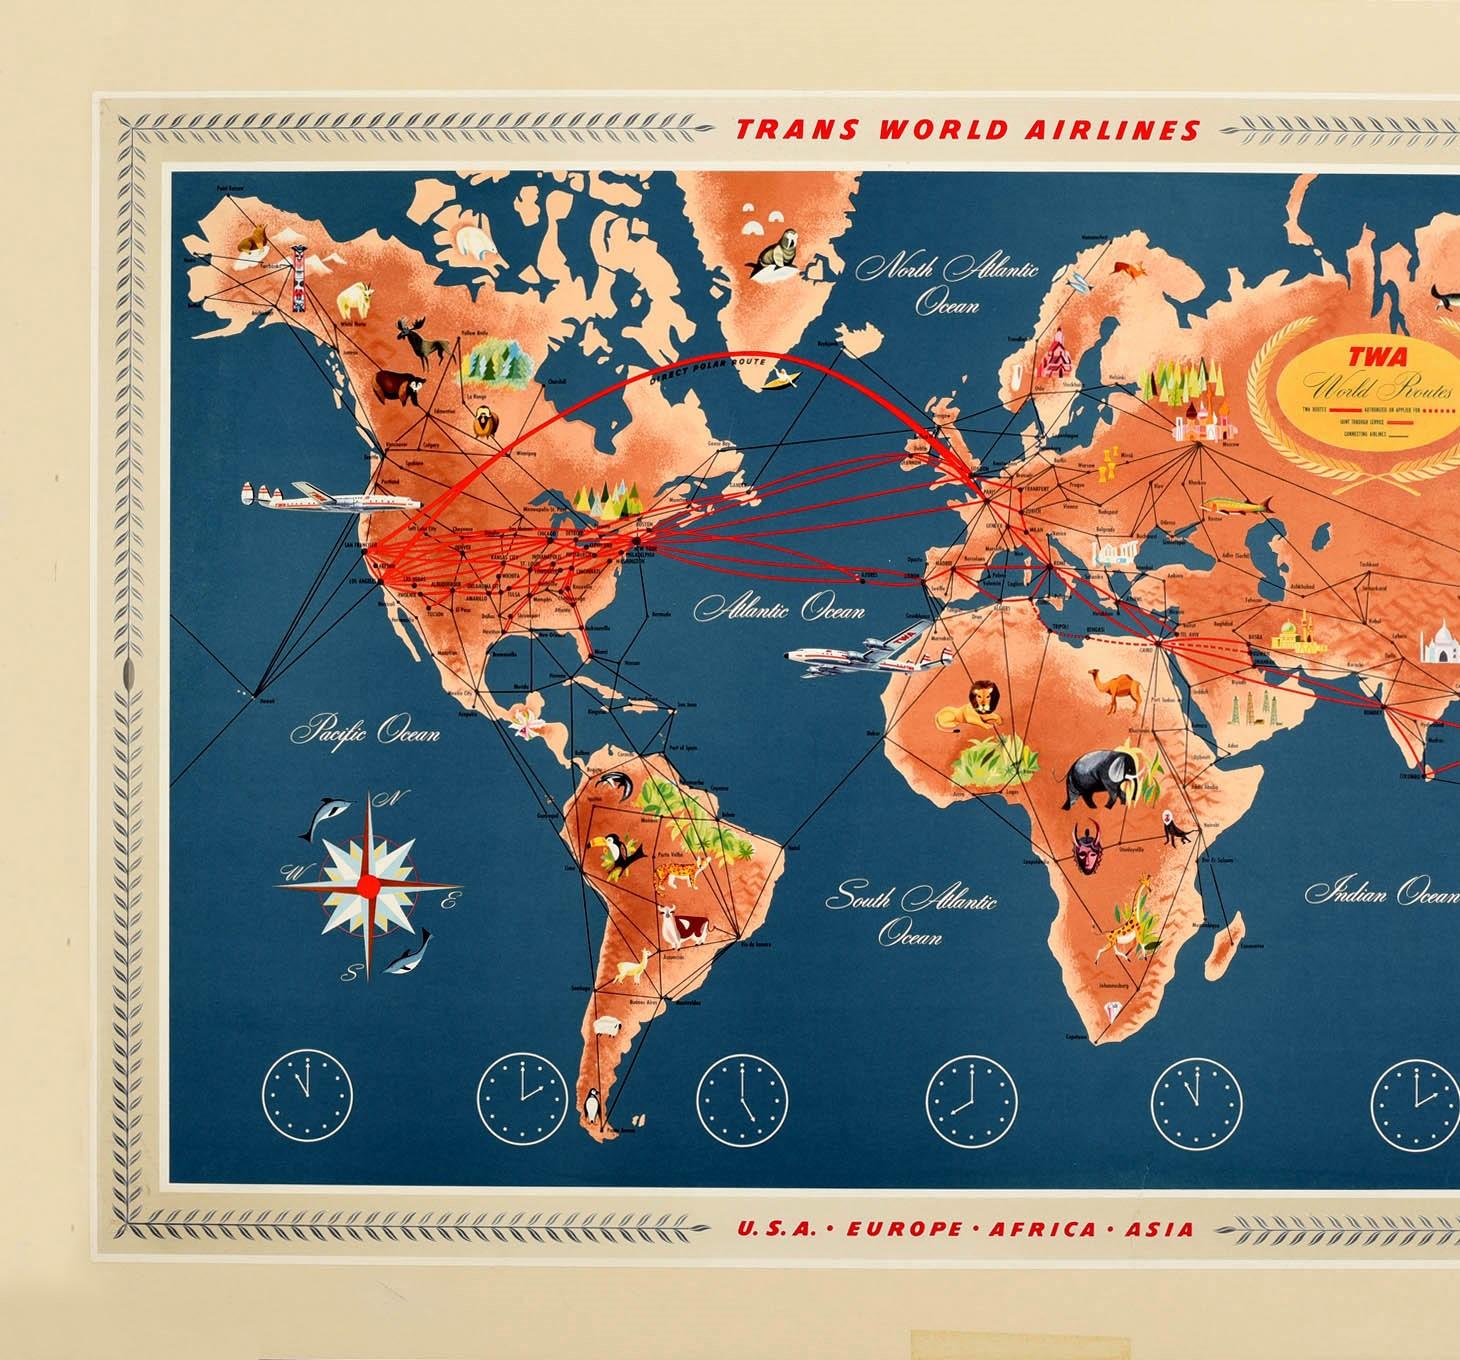 Original vintage travel advertising map poster for TWA / Trans World Airlines USA Europe Africa Asia featuring a pictorial map with the airline routes marked around the world and various places of interest and animals shown from the different